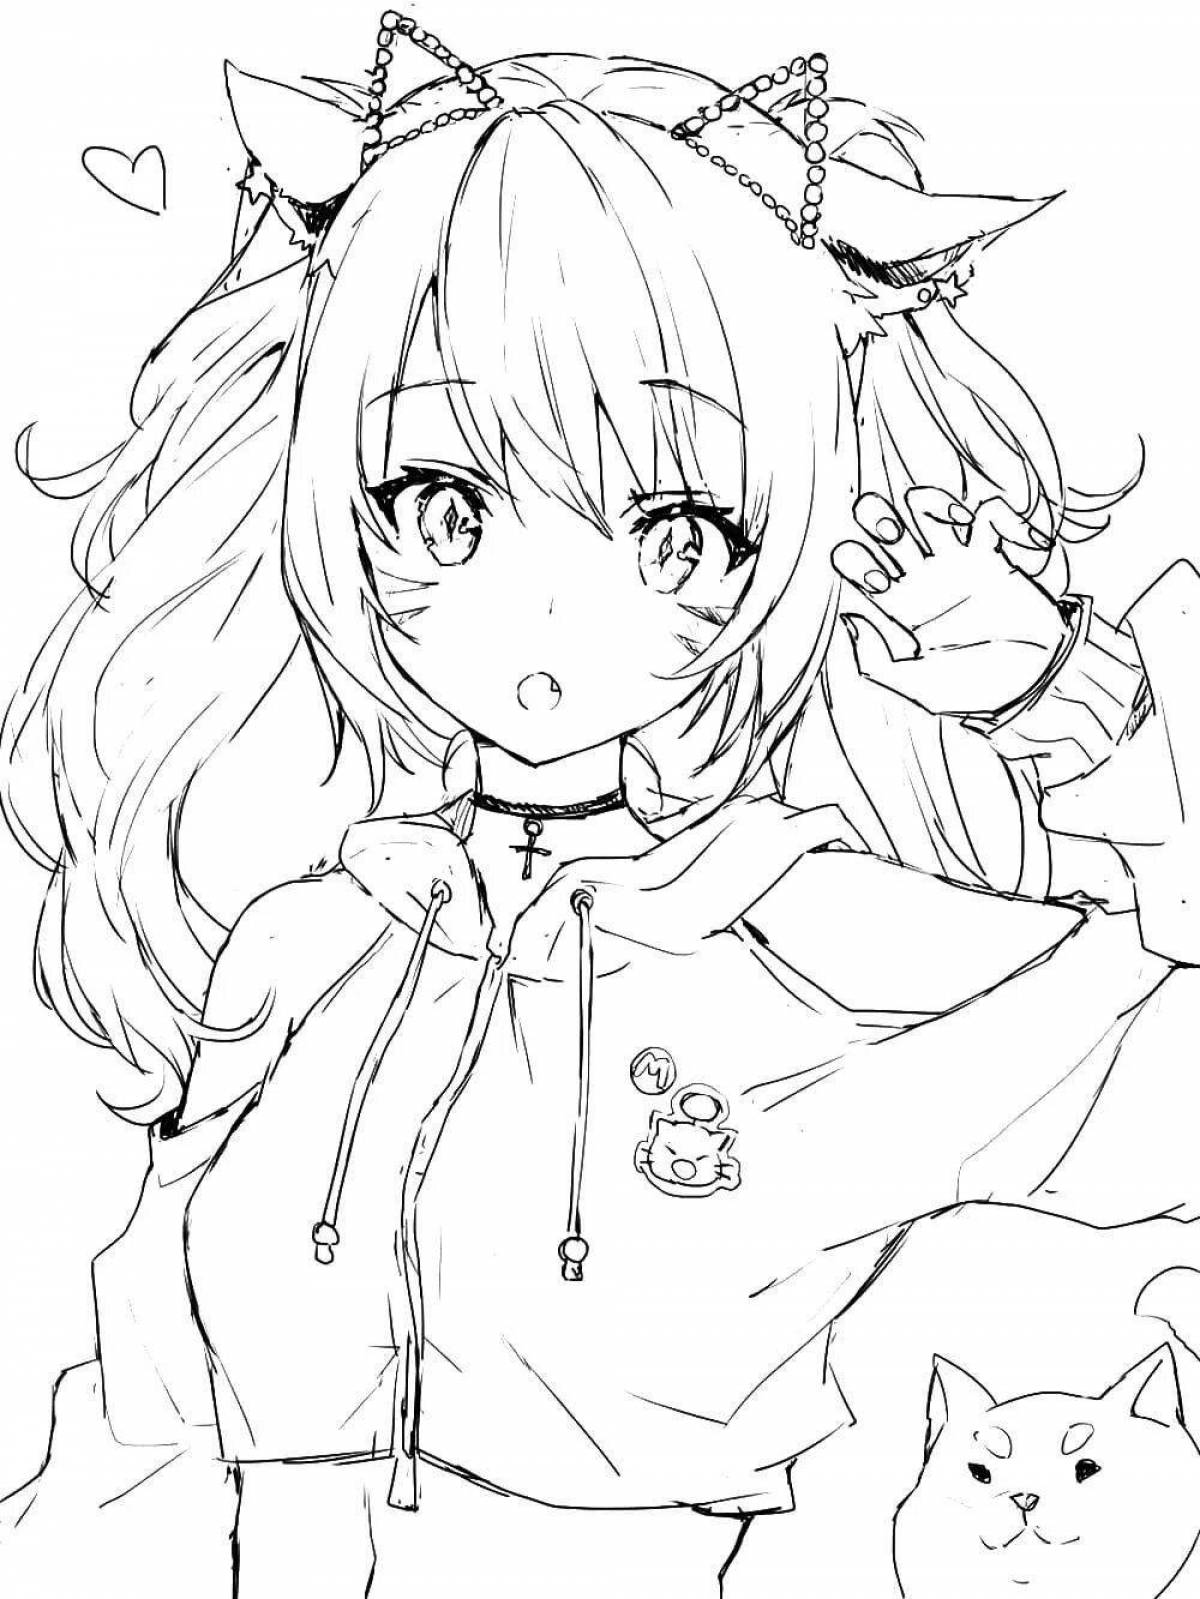 Radiant coloring page anime girls with ears